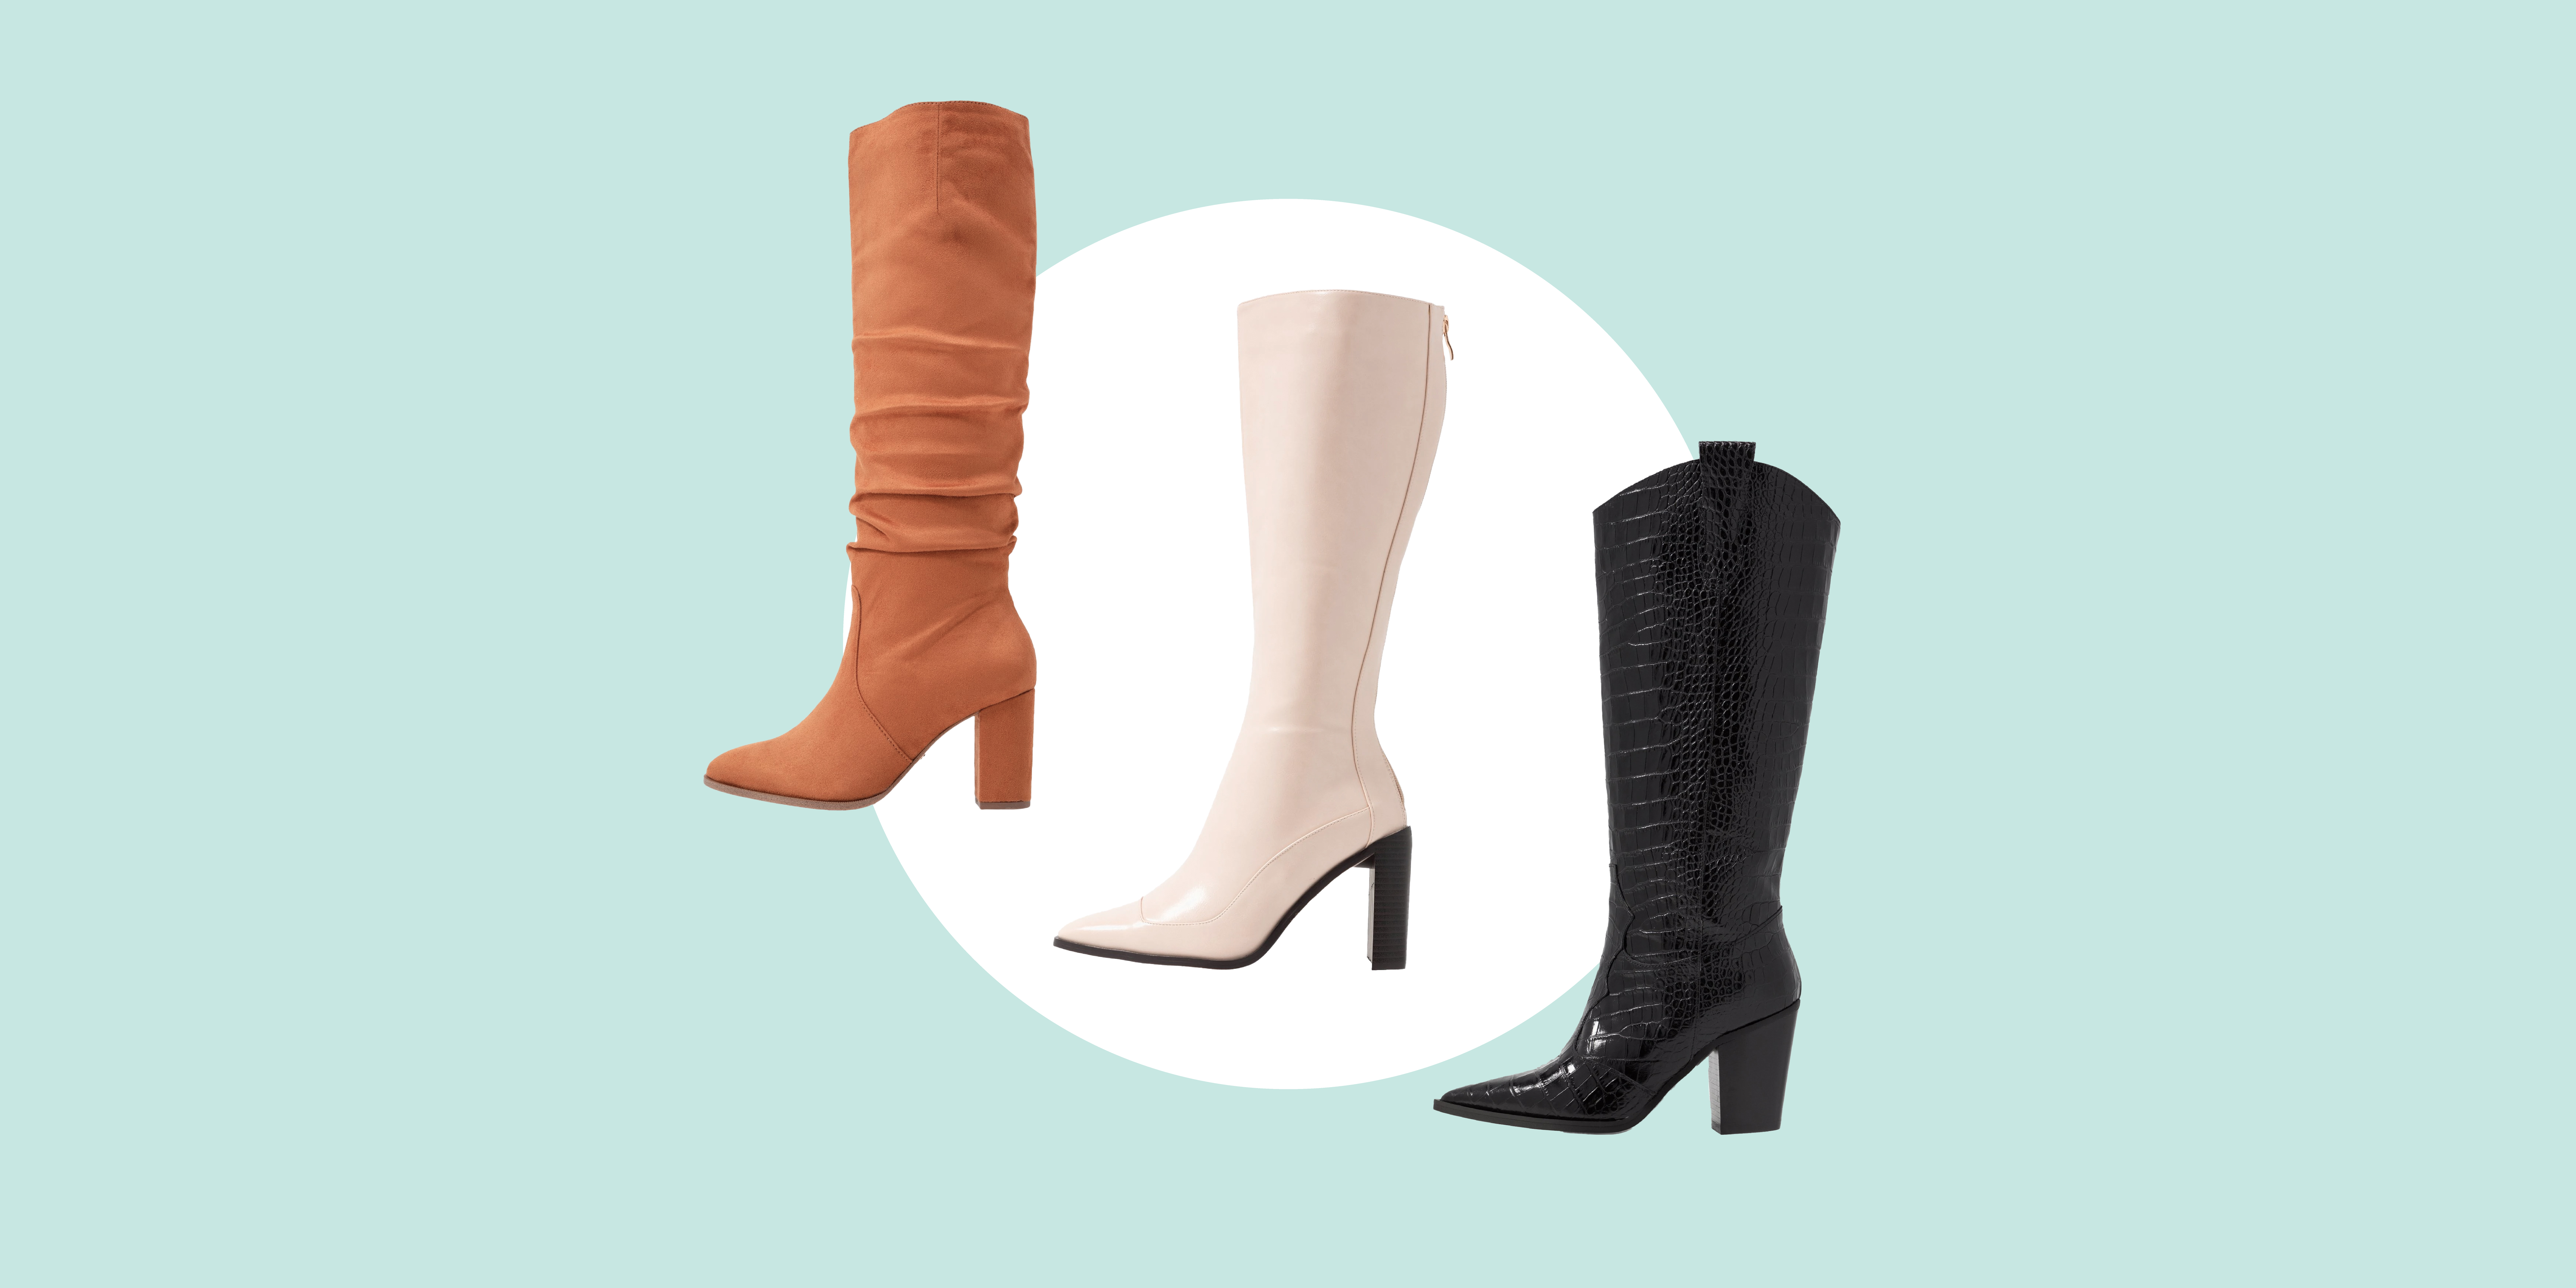 wide fitting knee high boots uk